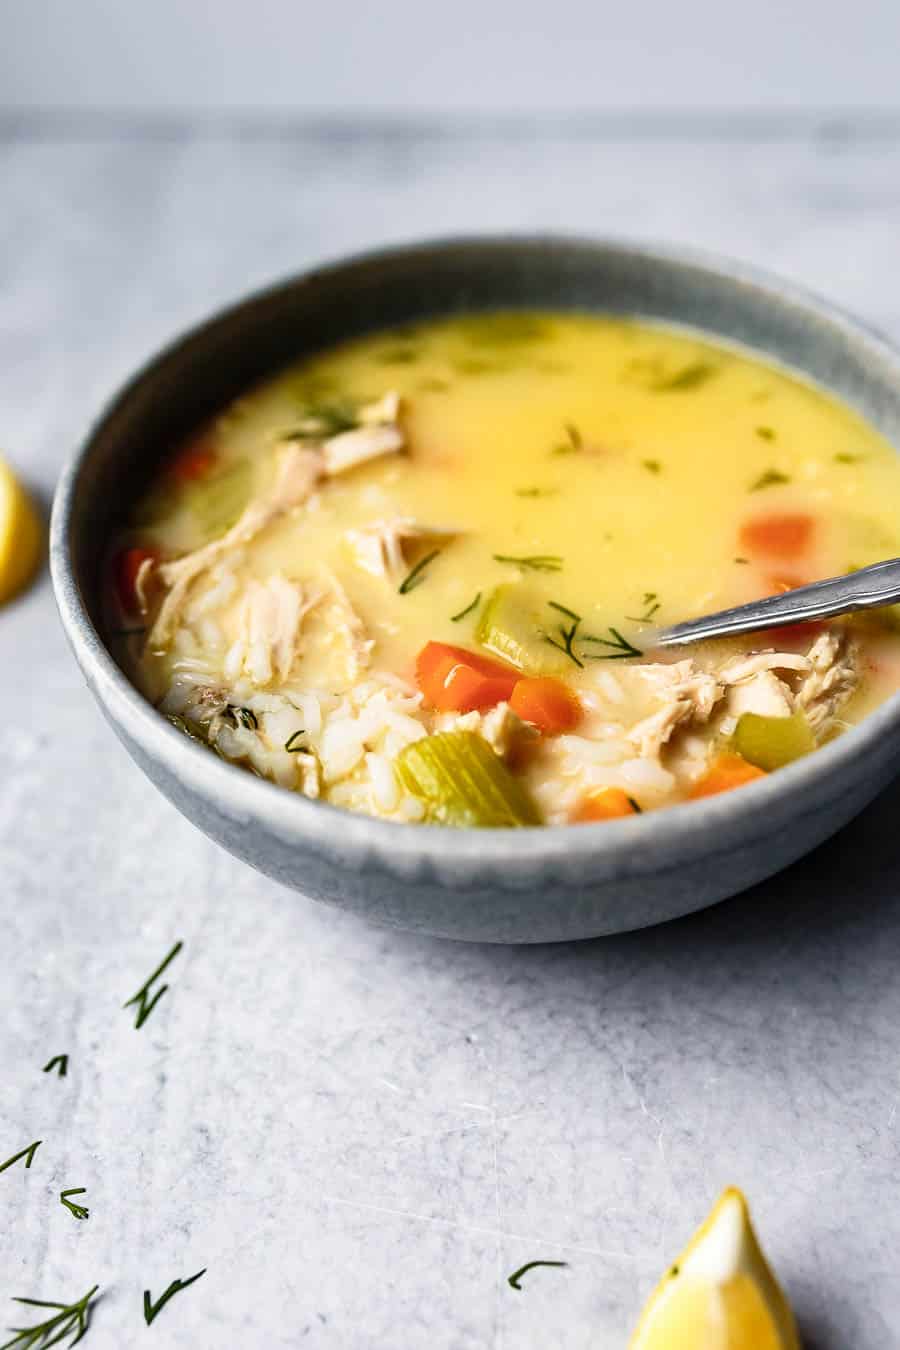 Yellow color Avgolemono Soup in a dark grey bowl, sitting on a light grey table. There is a silver spoon in the bowl and it is full of vegetables like carrot and celery. There is also rice and chicken in the soup.